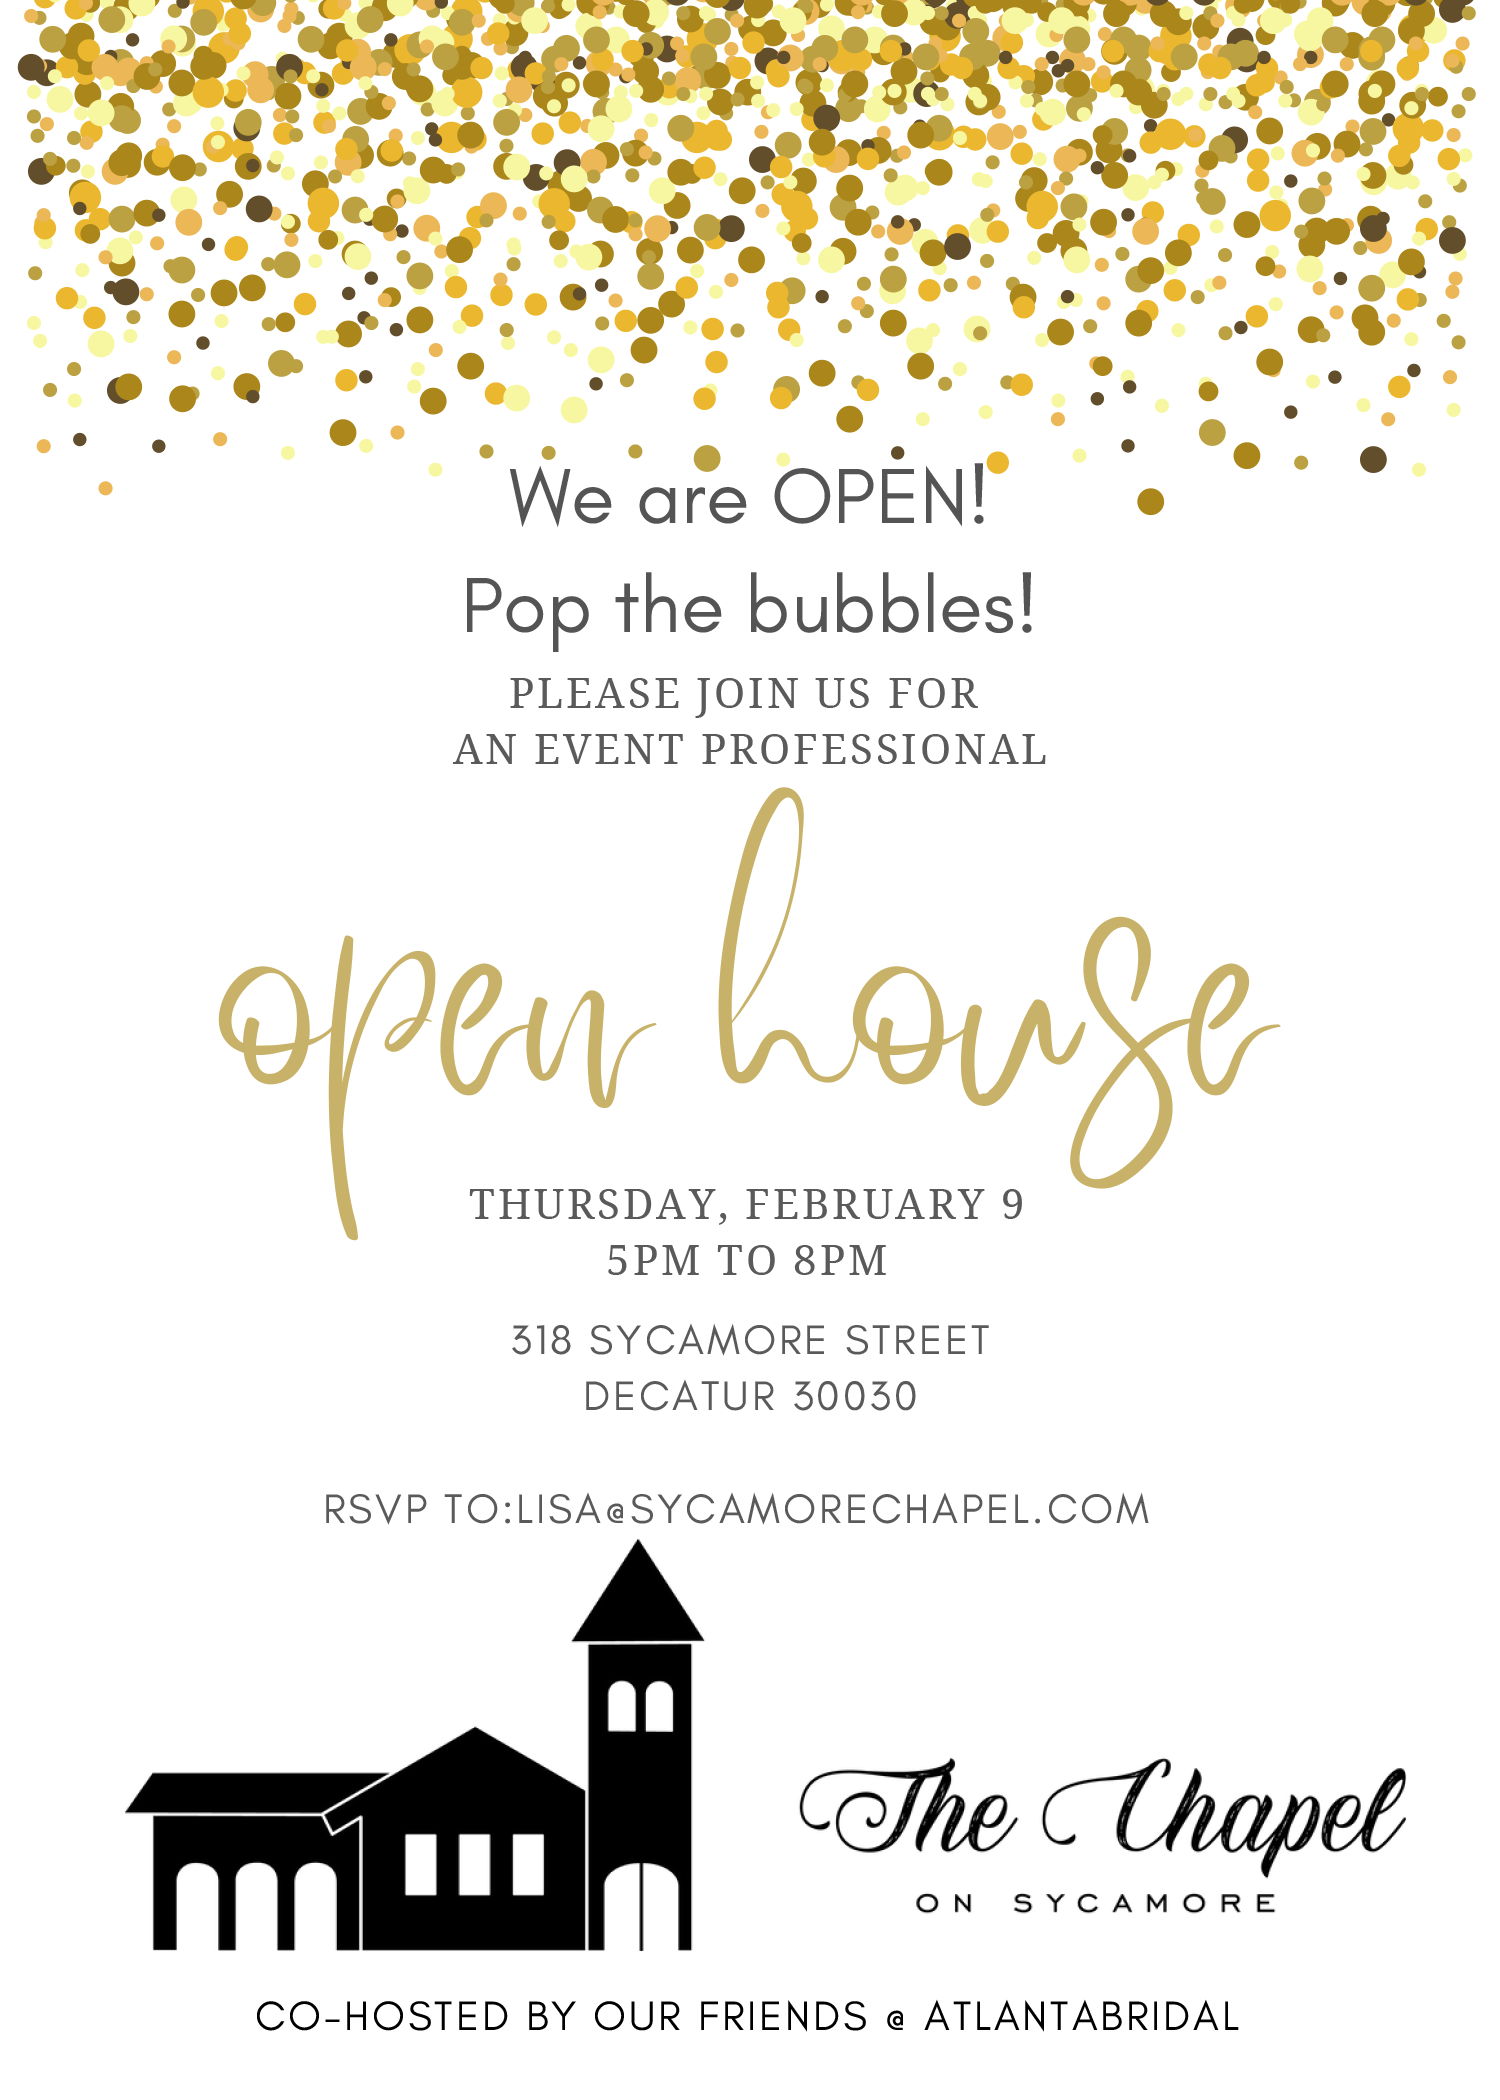 Image for Event: Open House and Networking Event for Wedding Professionals at The Chapel on Sycamore